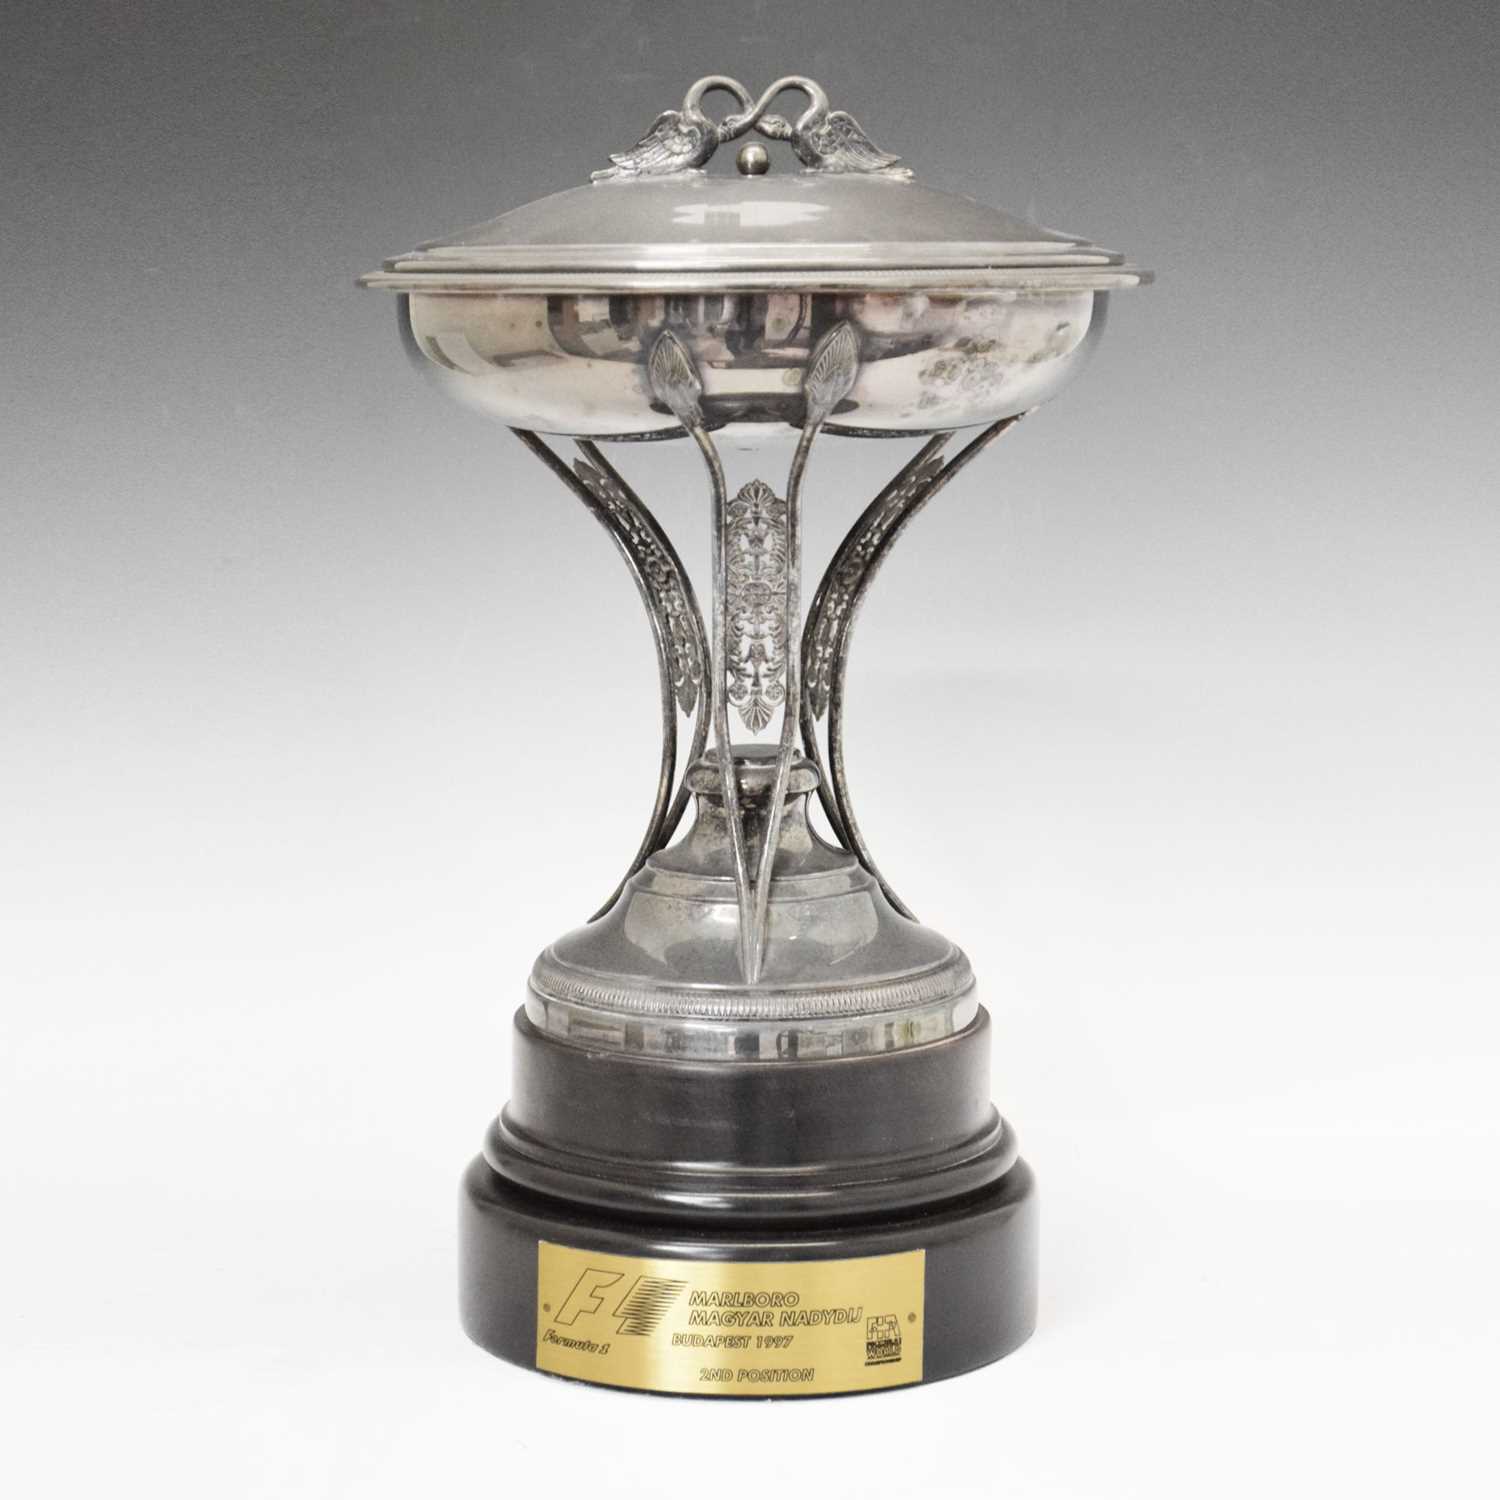 Lot 343 - F1 Interest - Silver plated trophy awarded for Damon Hill's second place position in the 1997 Hungarian Grand Prix